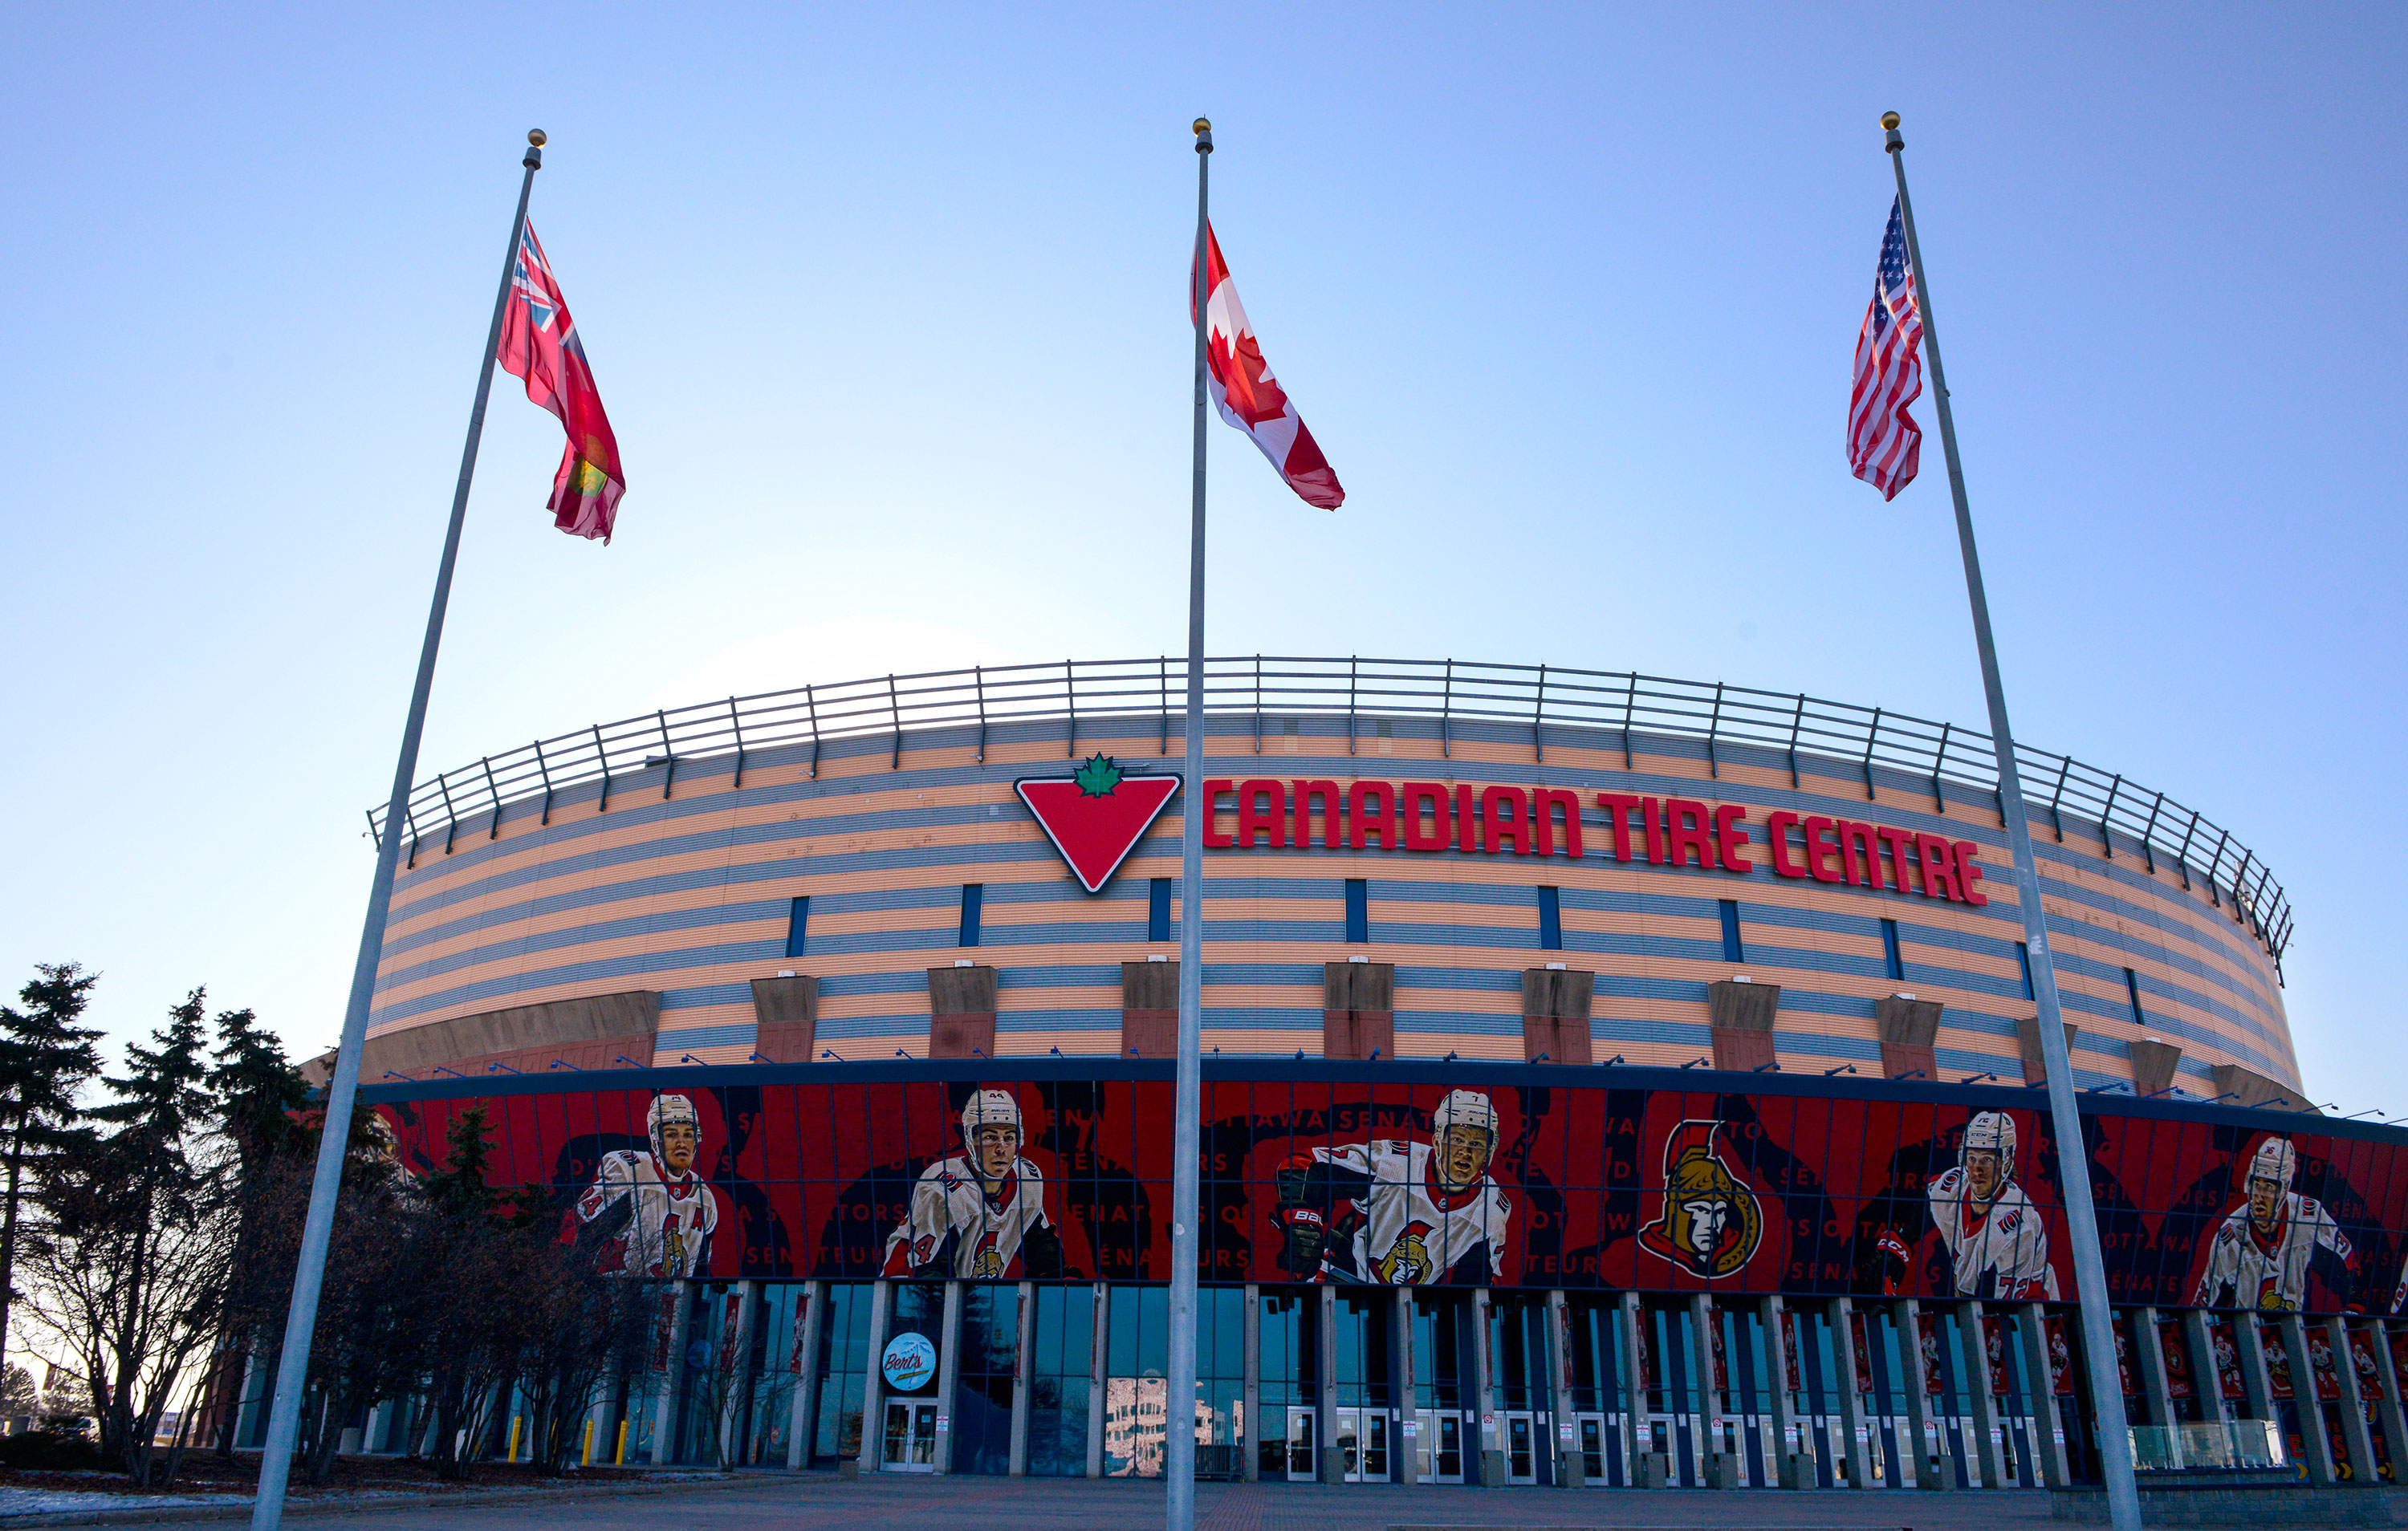 The home rink of the Ottawa Senators, the Canadian Tire Centre, stands in Ottawa, Ontario on March 12.